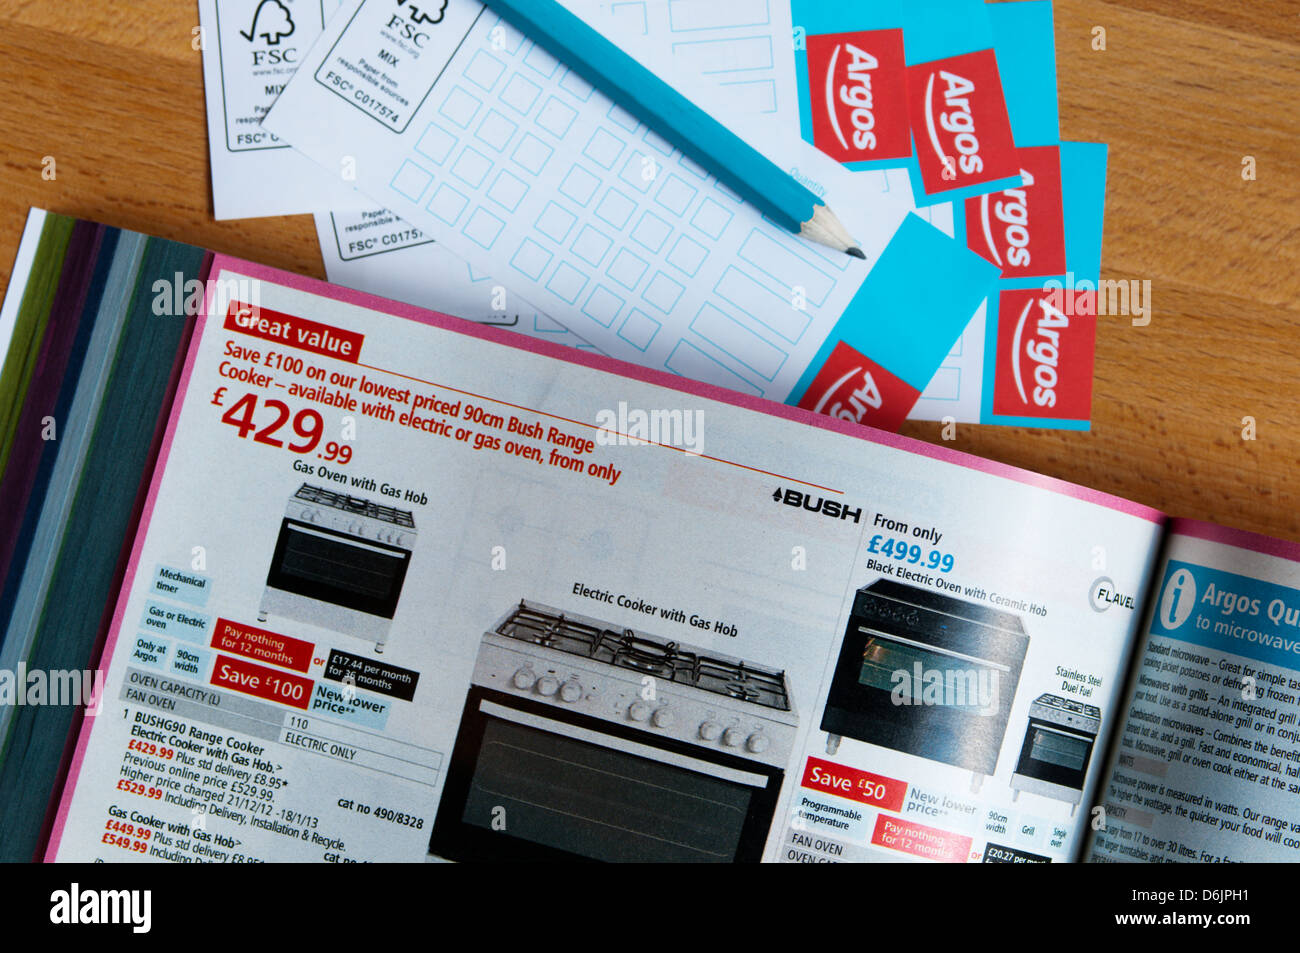 Ordering items from an in-store Argos catalogue. Stock Photo